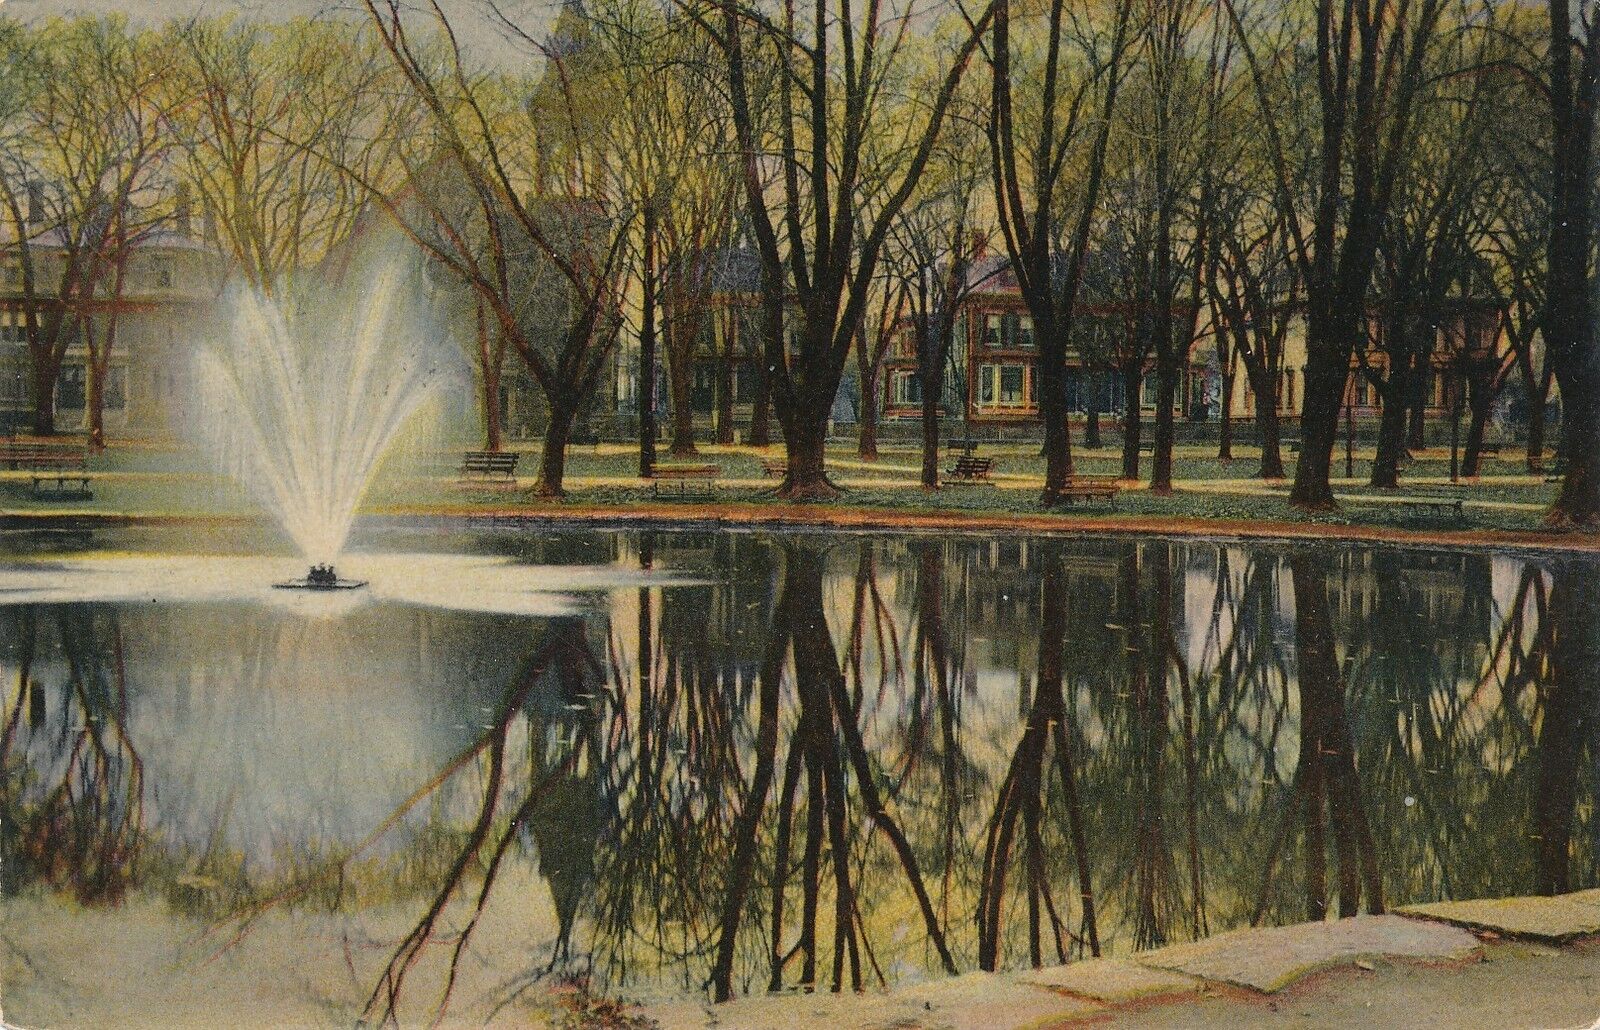 LAWRENCE MA – Fountain and Pond on Common Rotograph Postcard - 1912